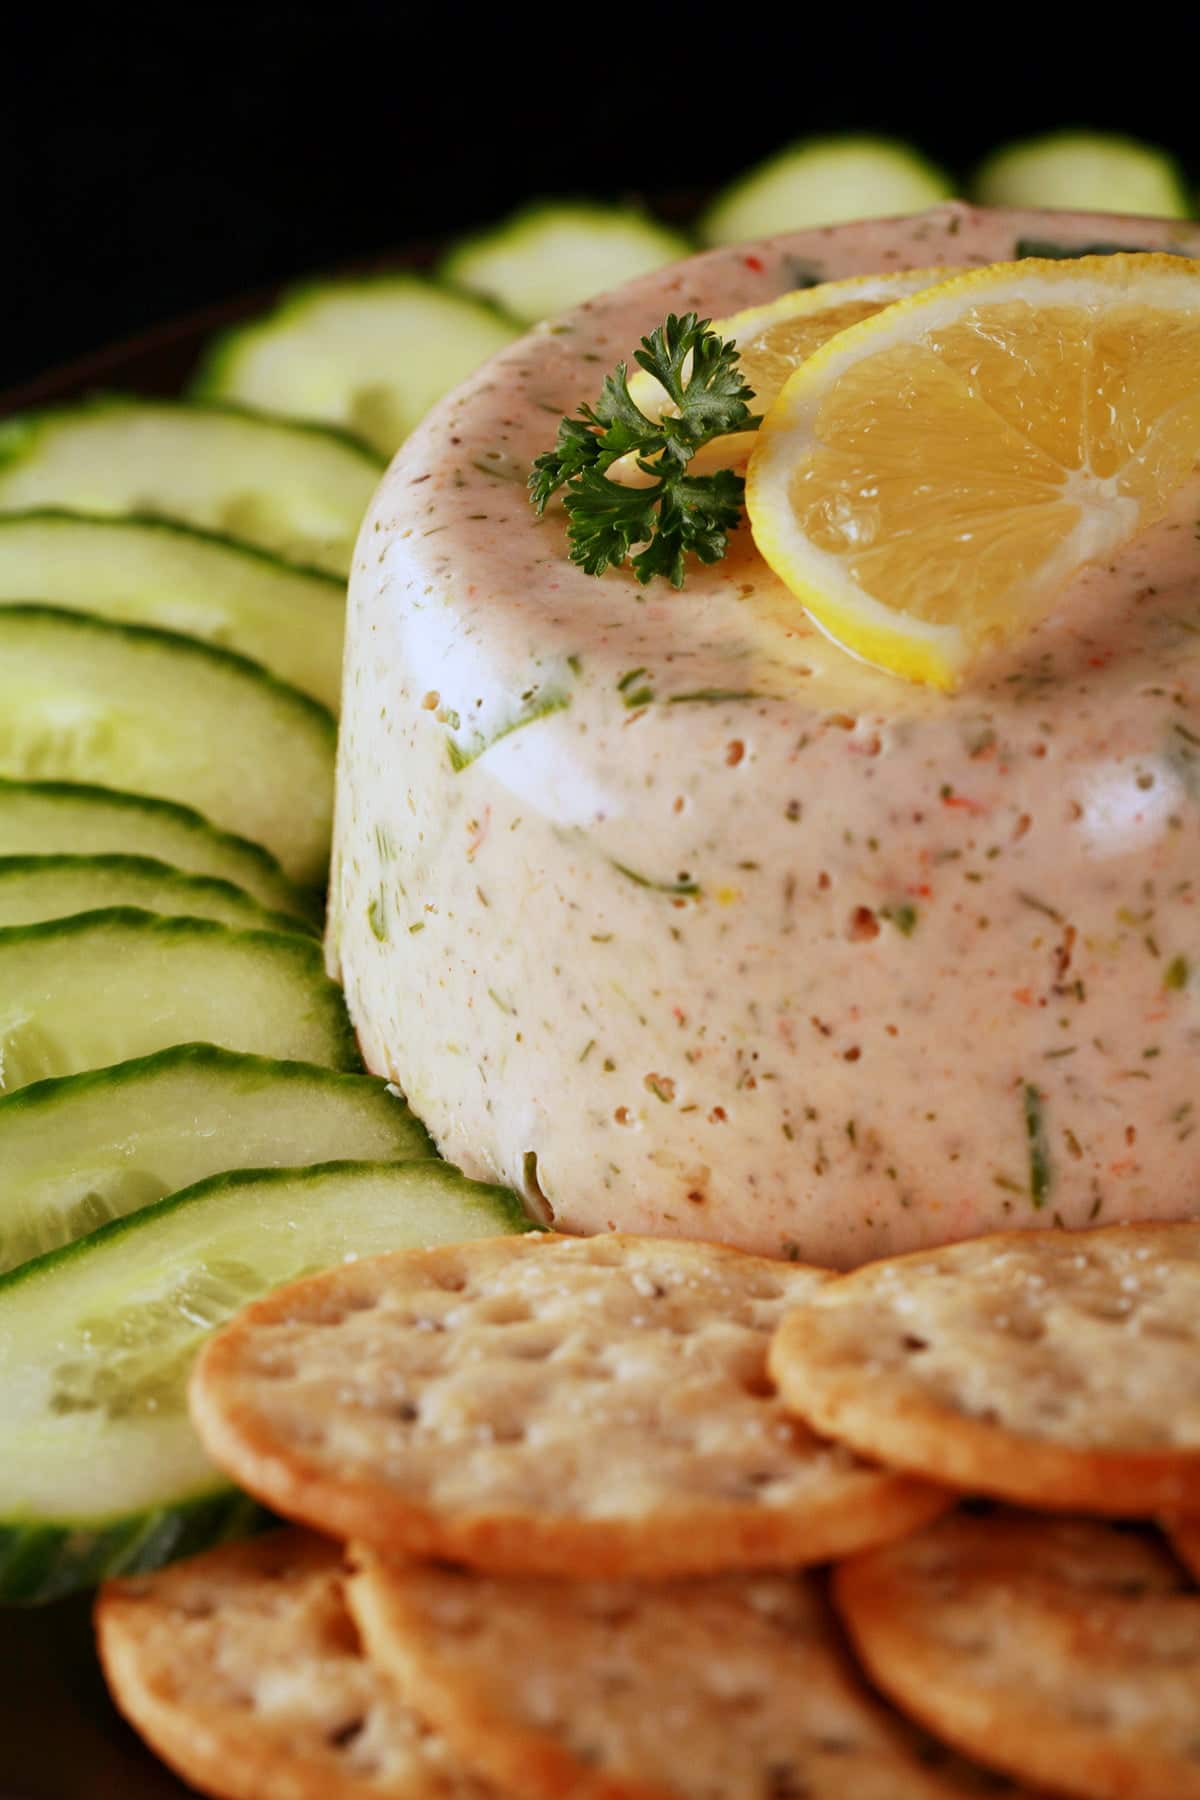 A closeup view of seafood mousse. It is topped with slices of lemon and a sprig of parsley, and is surrounded by cucumber slices and crackers.